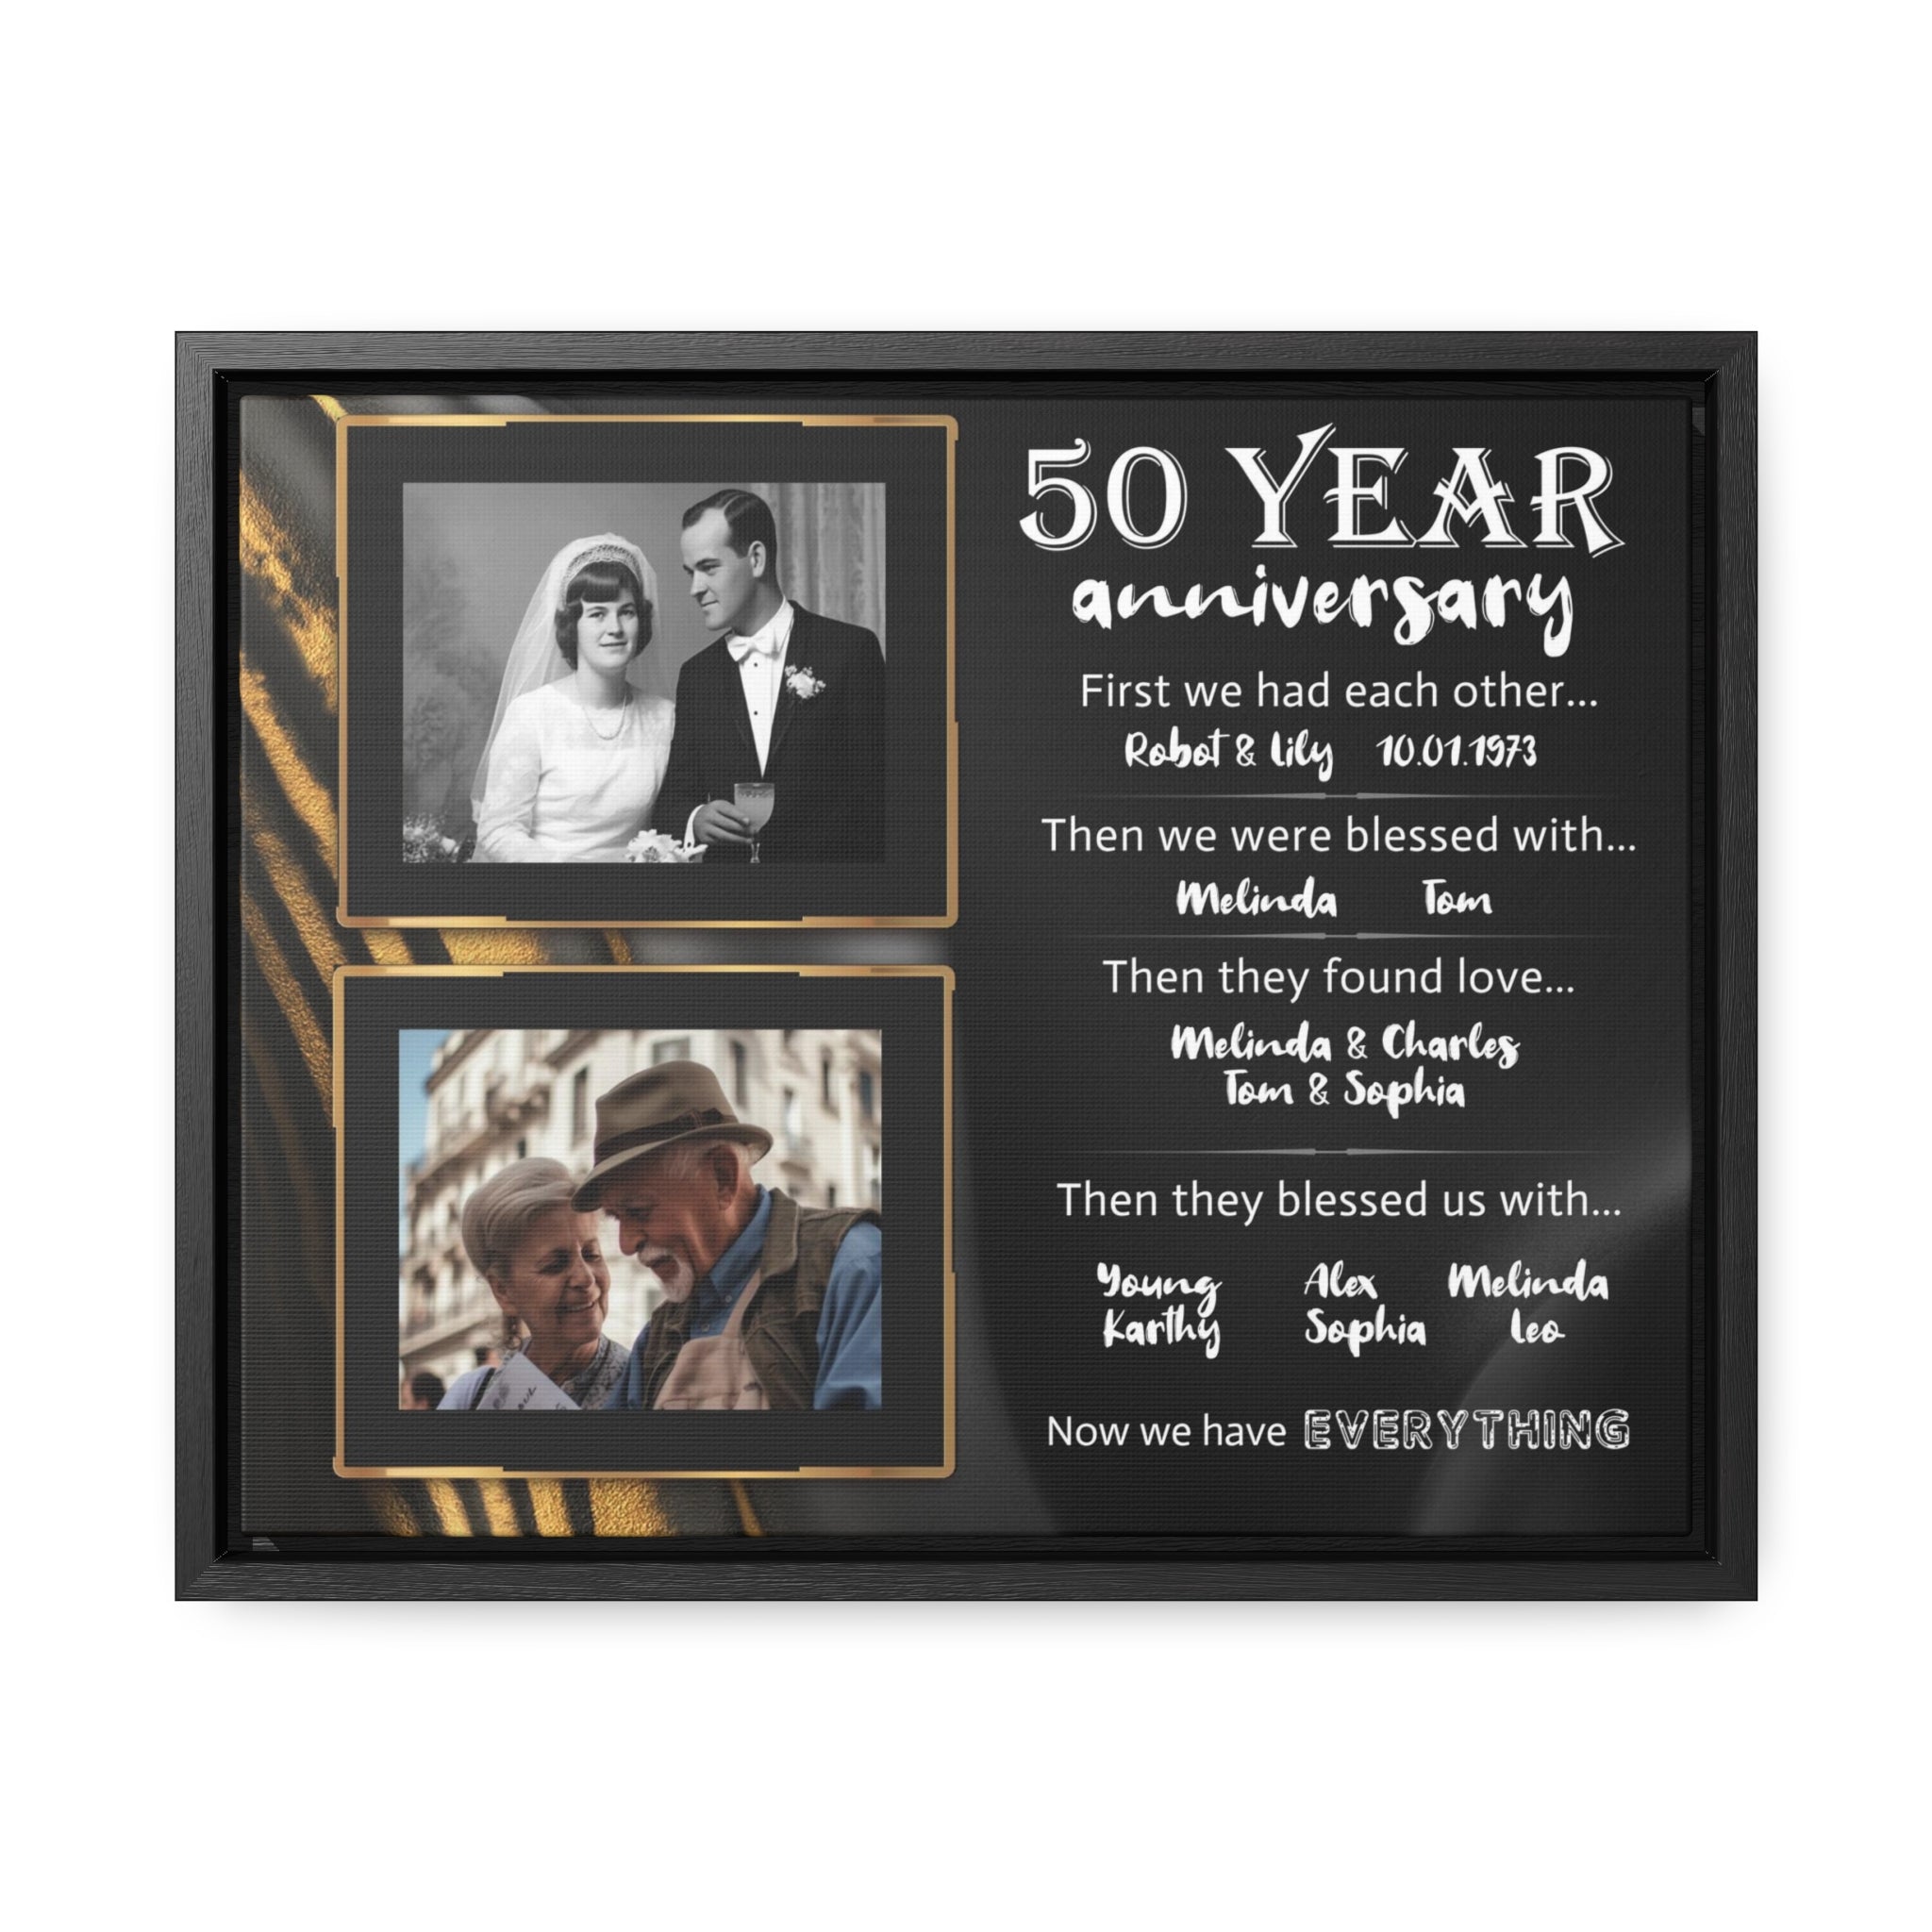 Our Family - Personalized 50th Year Anniversary Canvas Print